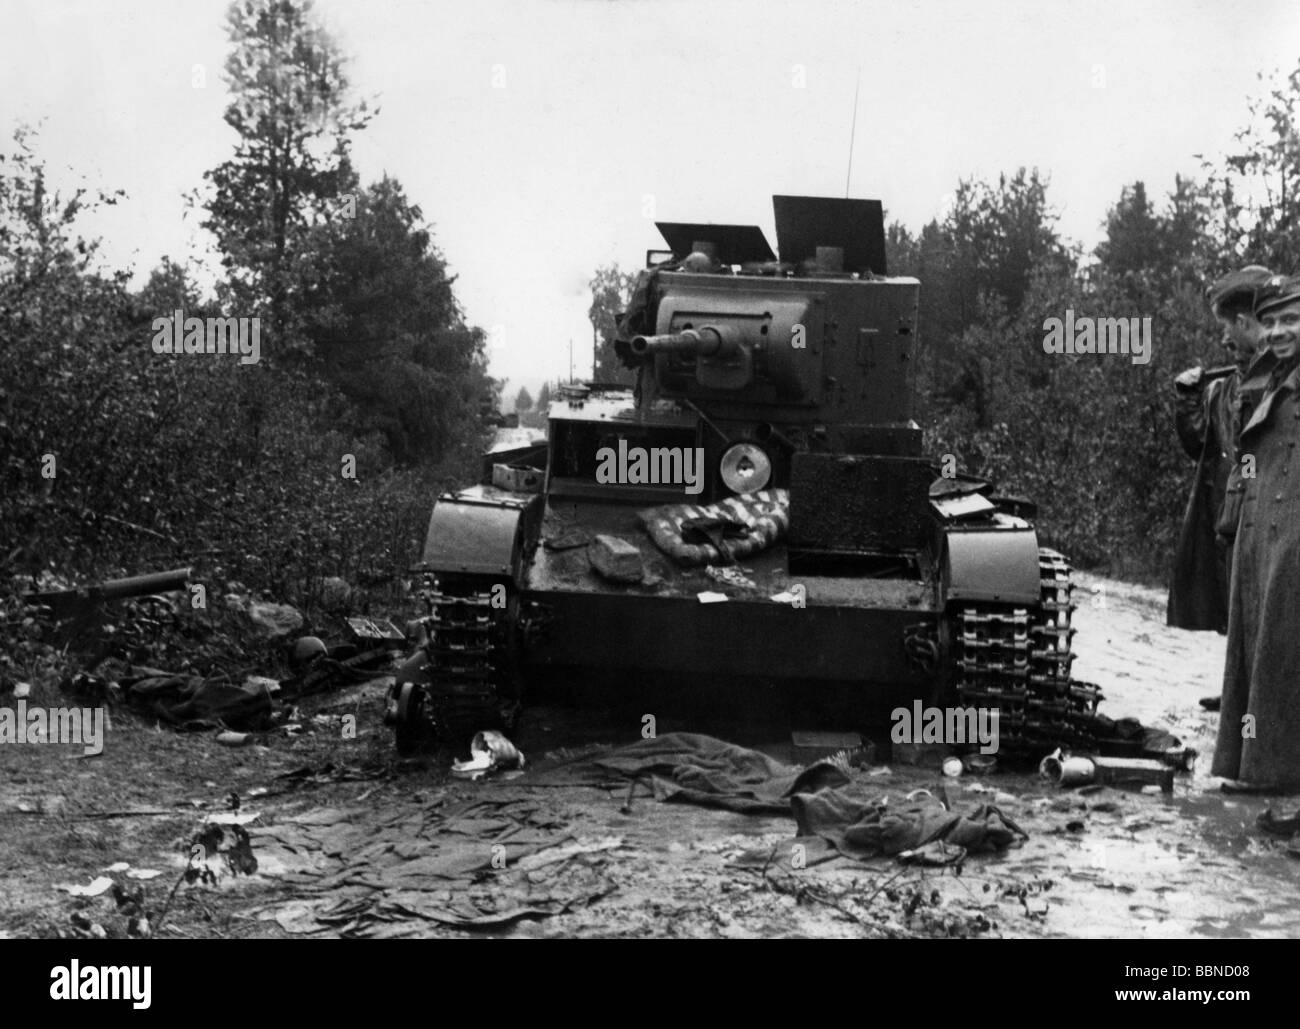 events, Second World War / WWII, Finland, knocked out Soviet light tank T-26, probably 1941, tanks, 20th century, destroyed, soldiers, USSR, Soviet Union, Russia, destruction, wreck, scattered equipment, T 26, T26, historic, historical, people, 1940s, Stock Photo